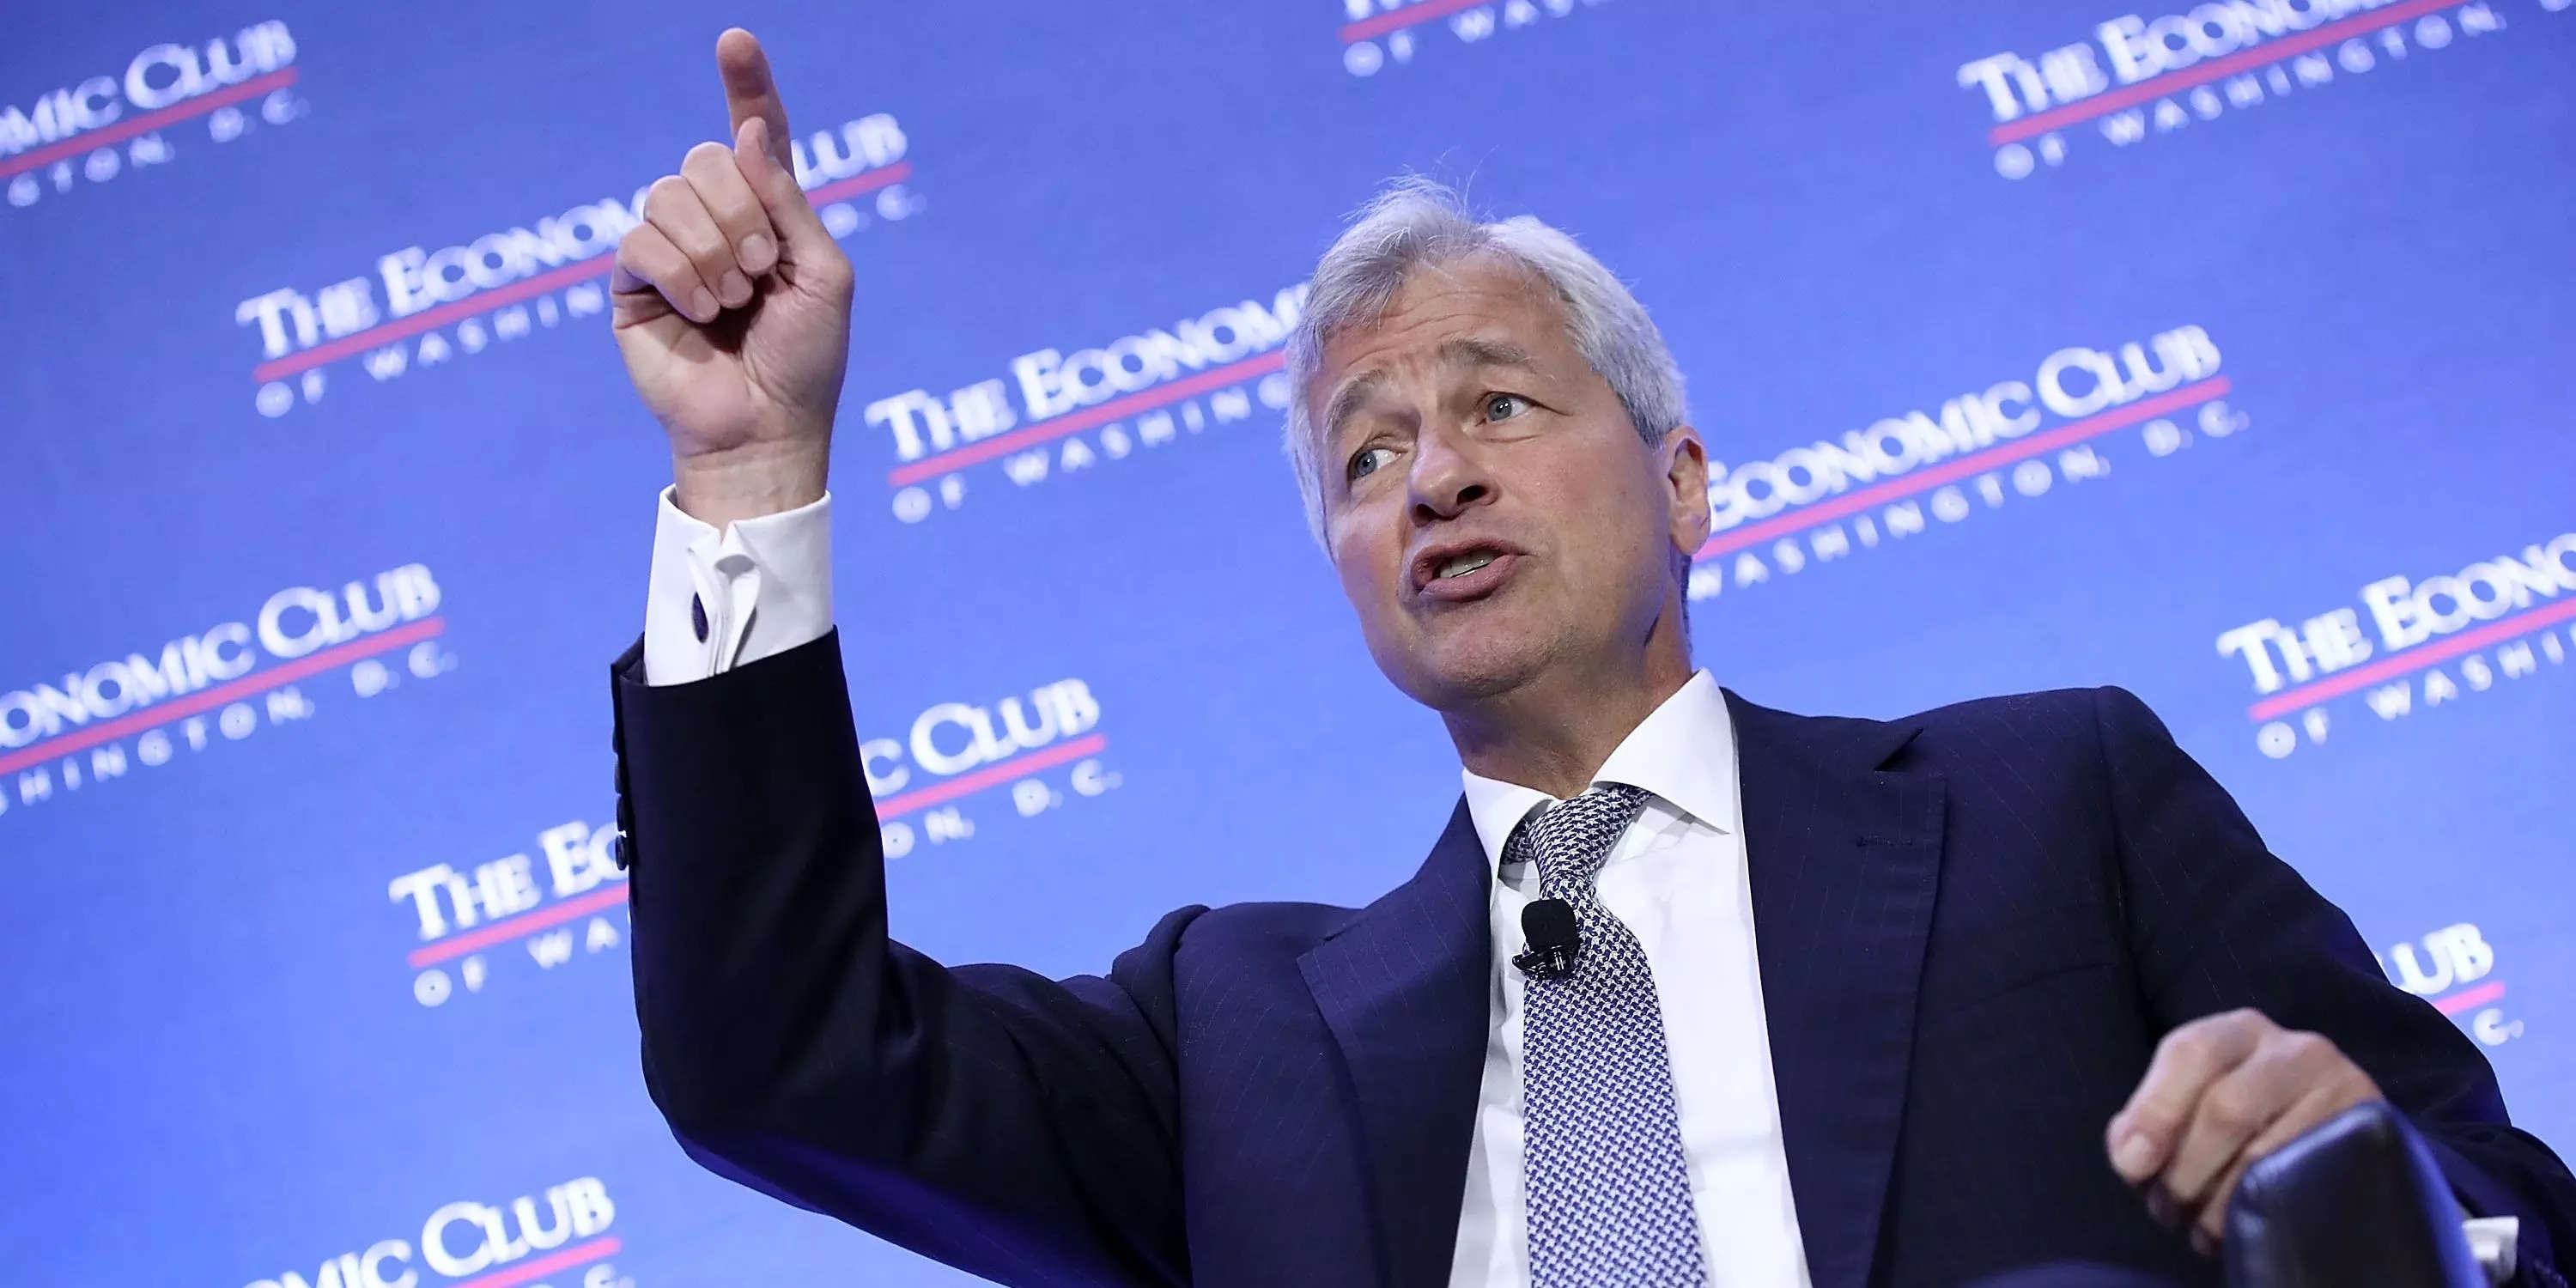 Jamie Dimon, Chairman and CEO of JPMorgan Chase & Co., speaks at the Economic Club of Washington September 12, 2016 in Washington, DC. Dimon joined a discussion on the state of U.S., global and regional economies.